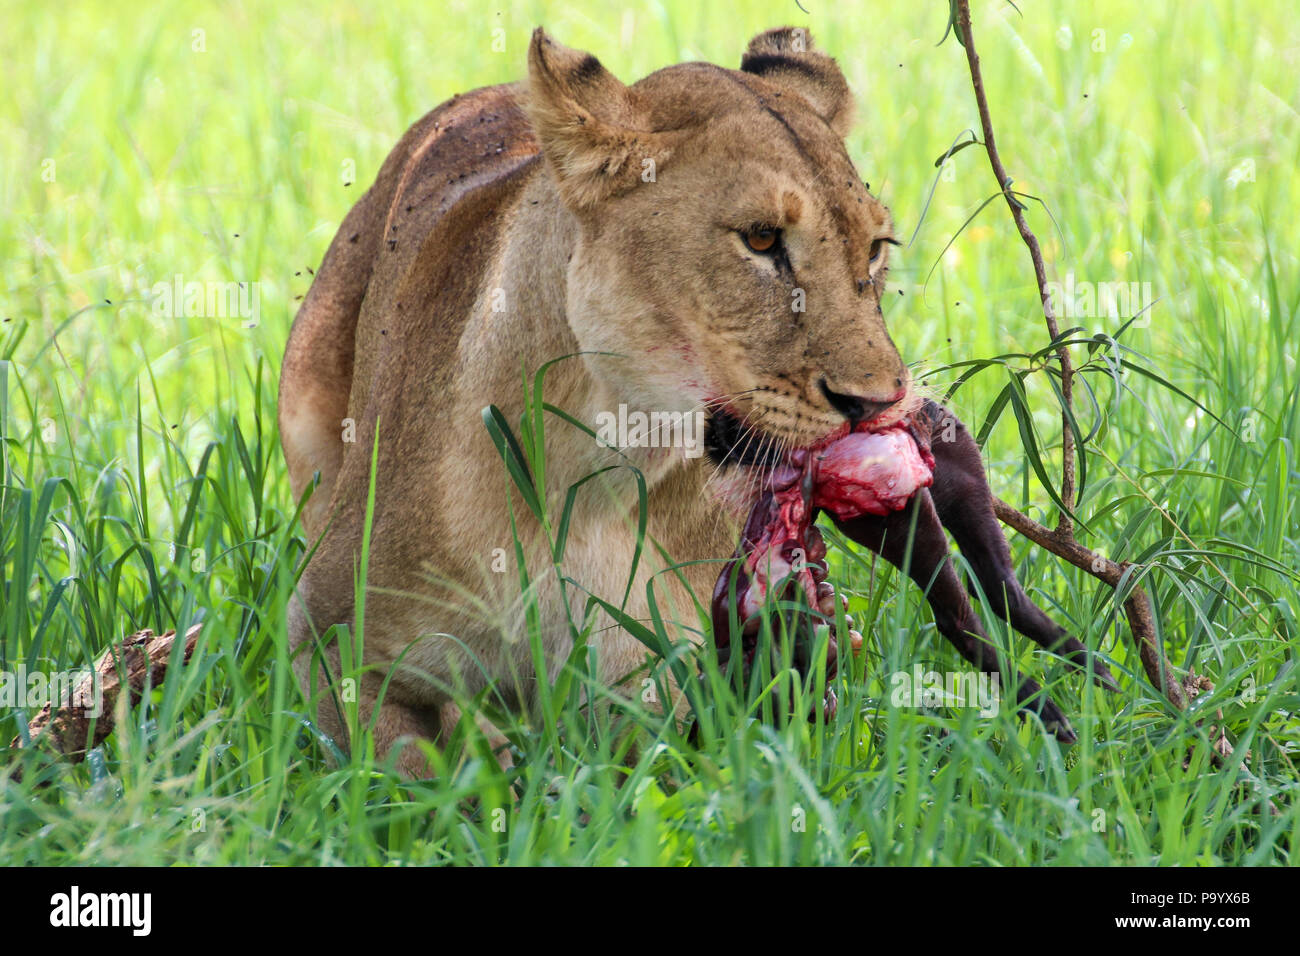 Lioness in serengeti NP eating a warthog Stock Photo